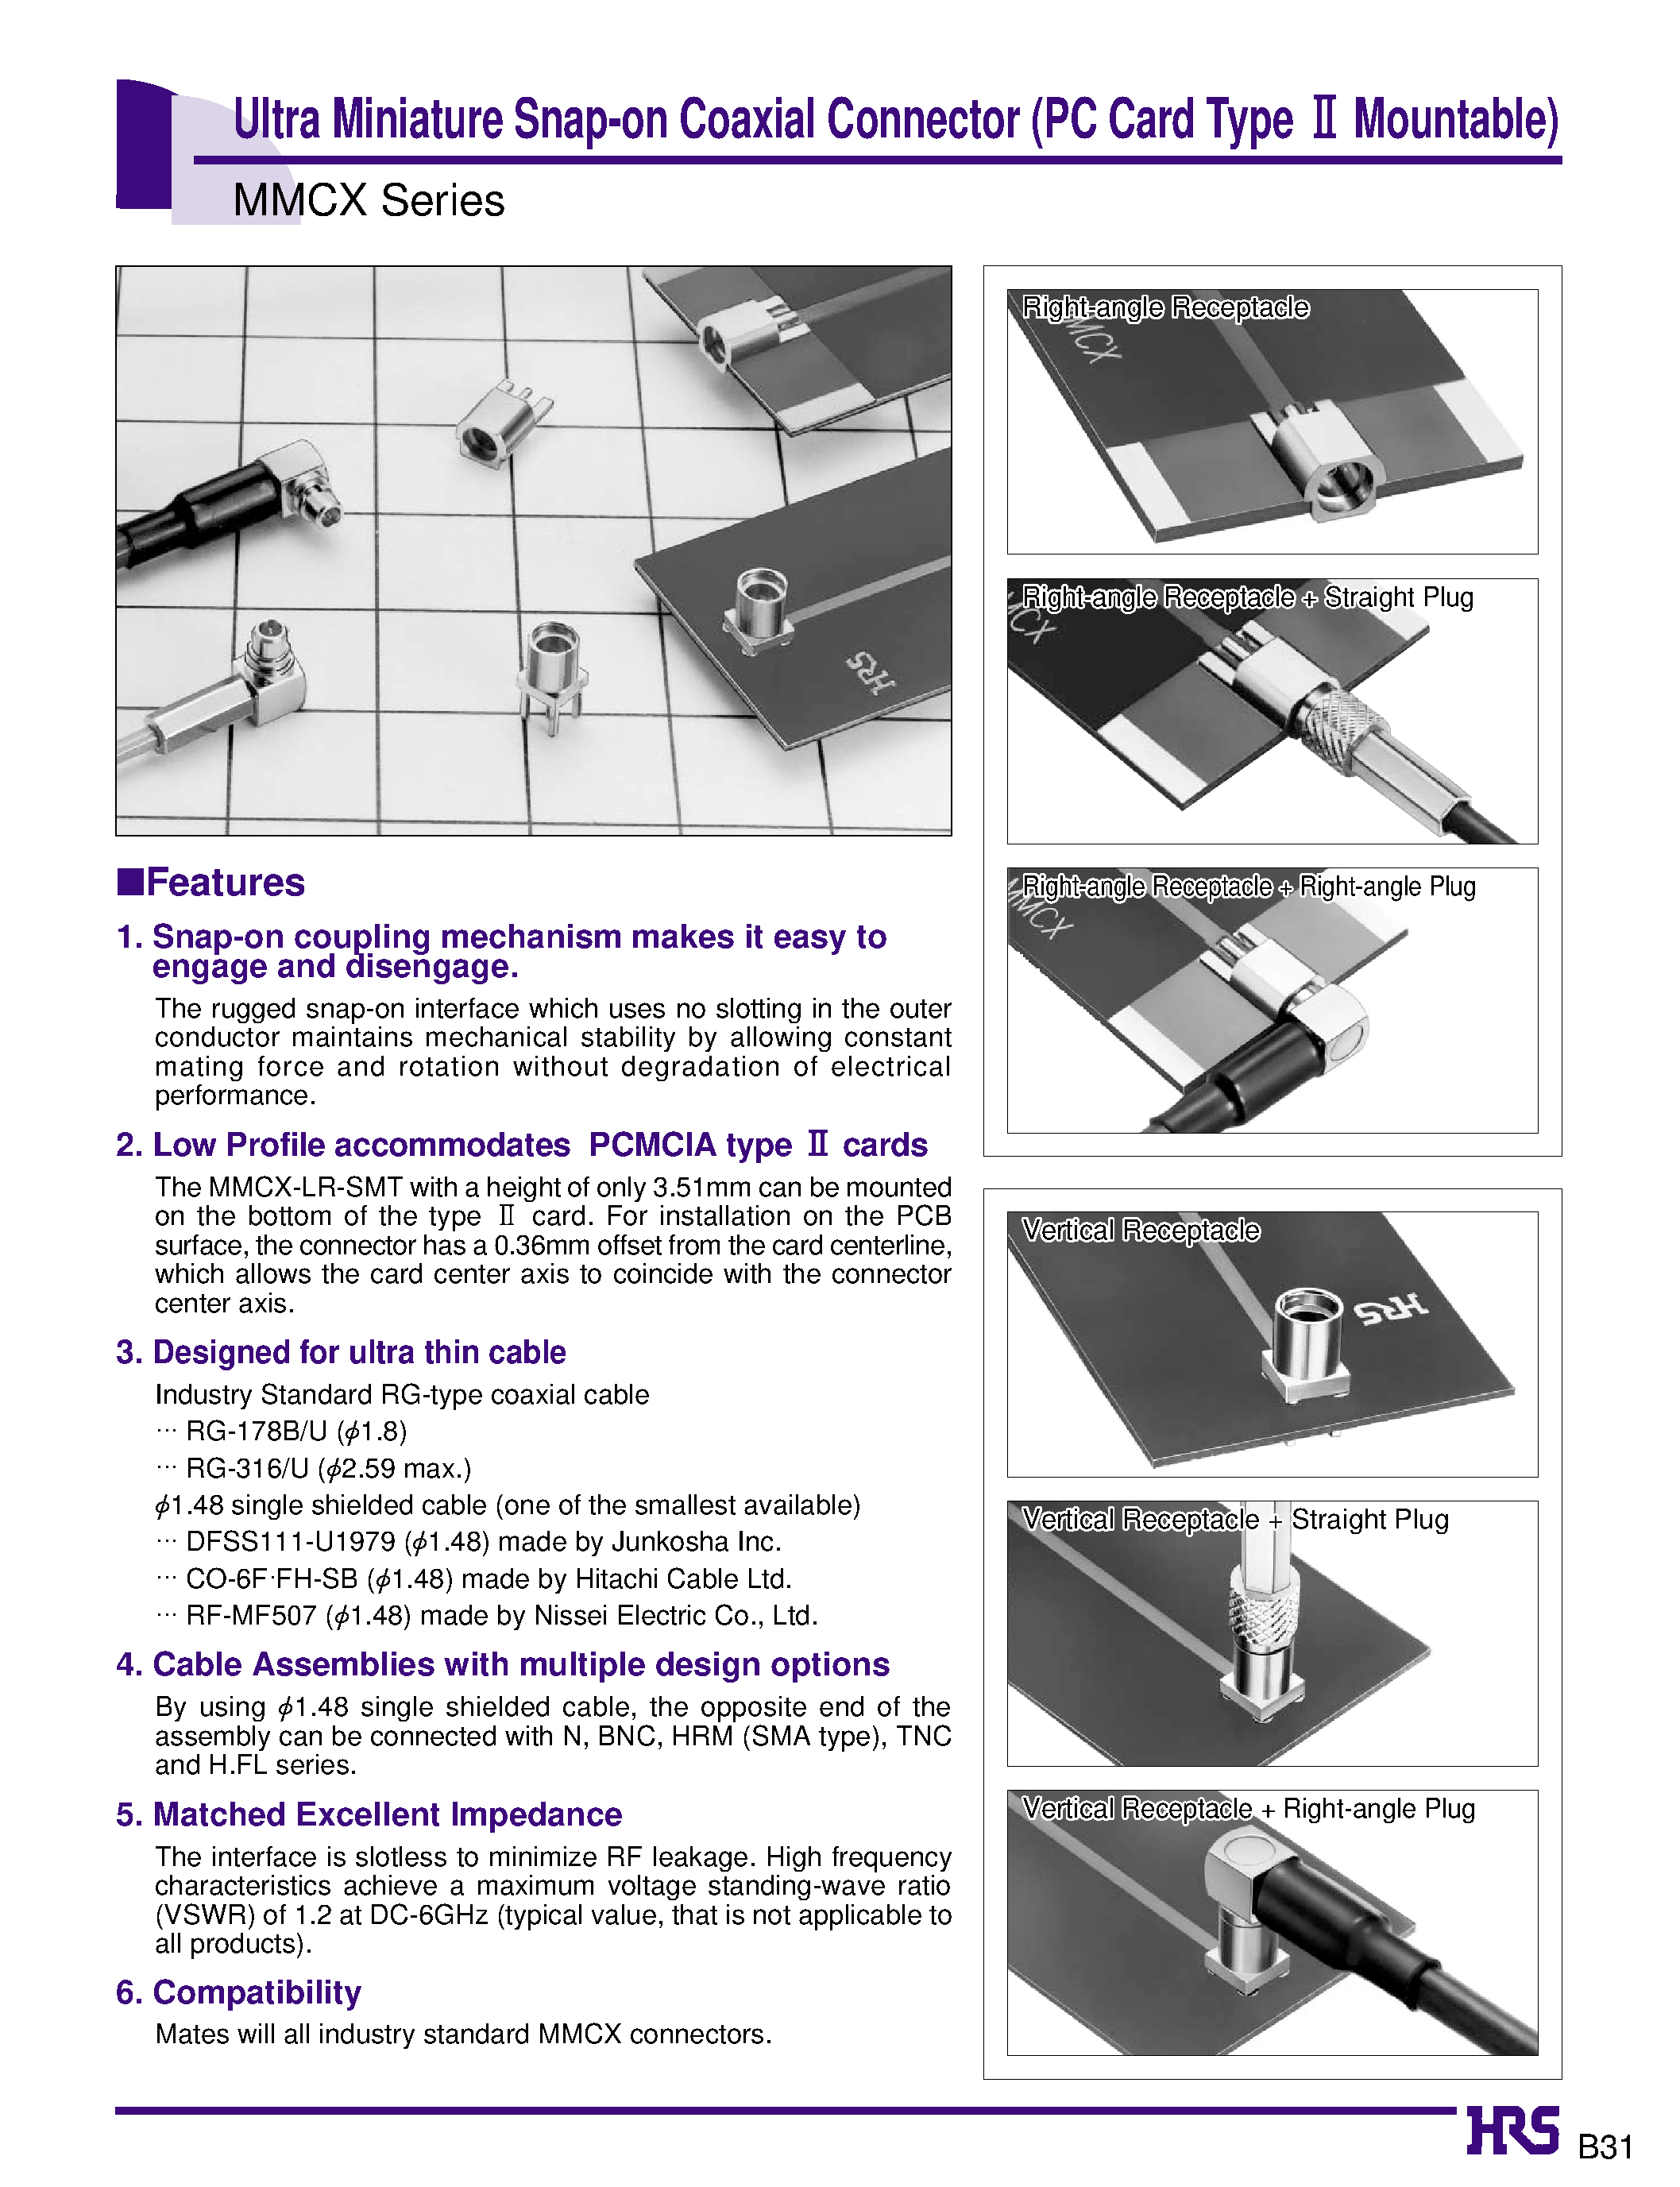 Datasheet MMCX-R-178B/U - Ultra Miniature Snap-on Coaxial Connector (PC Card Type 2 Mountable) page 1